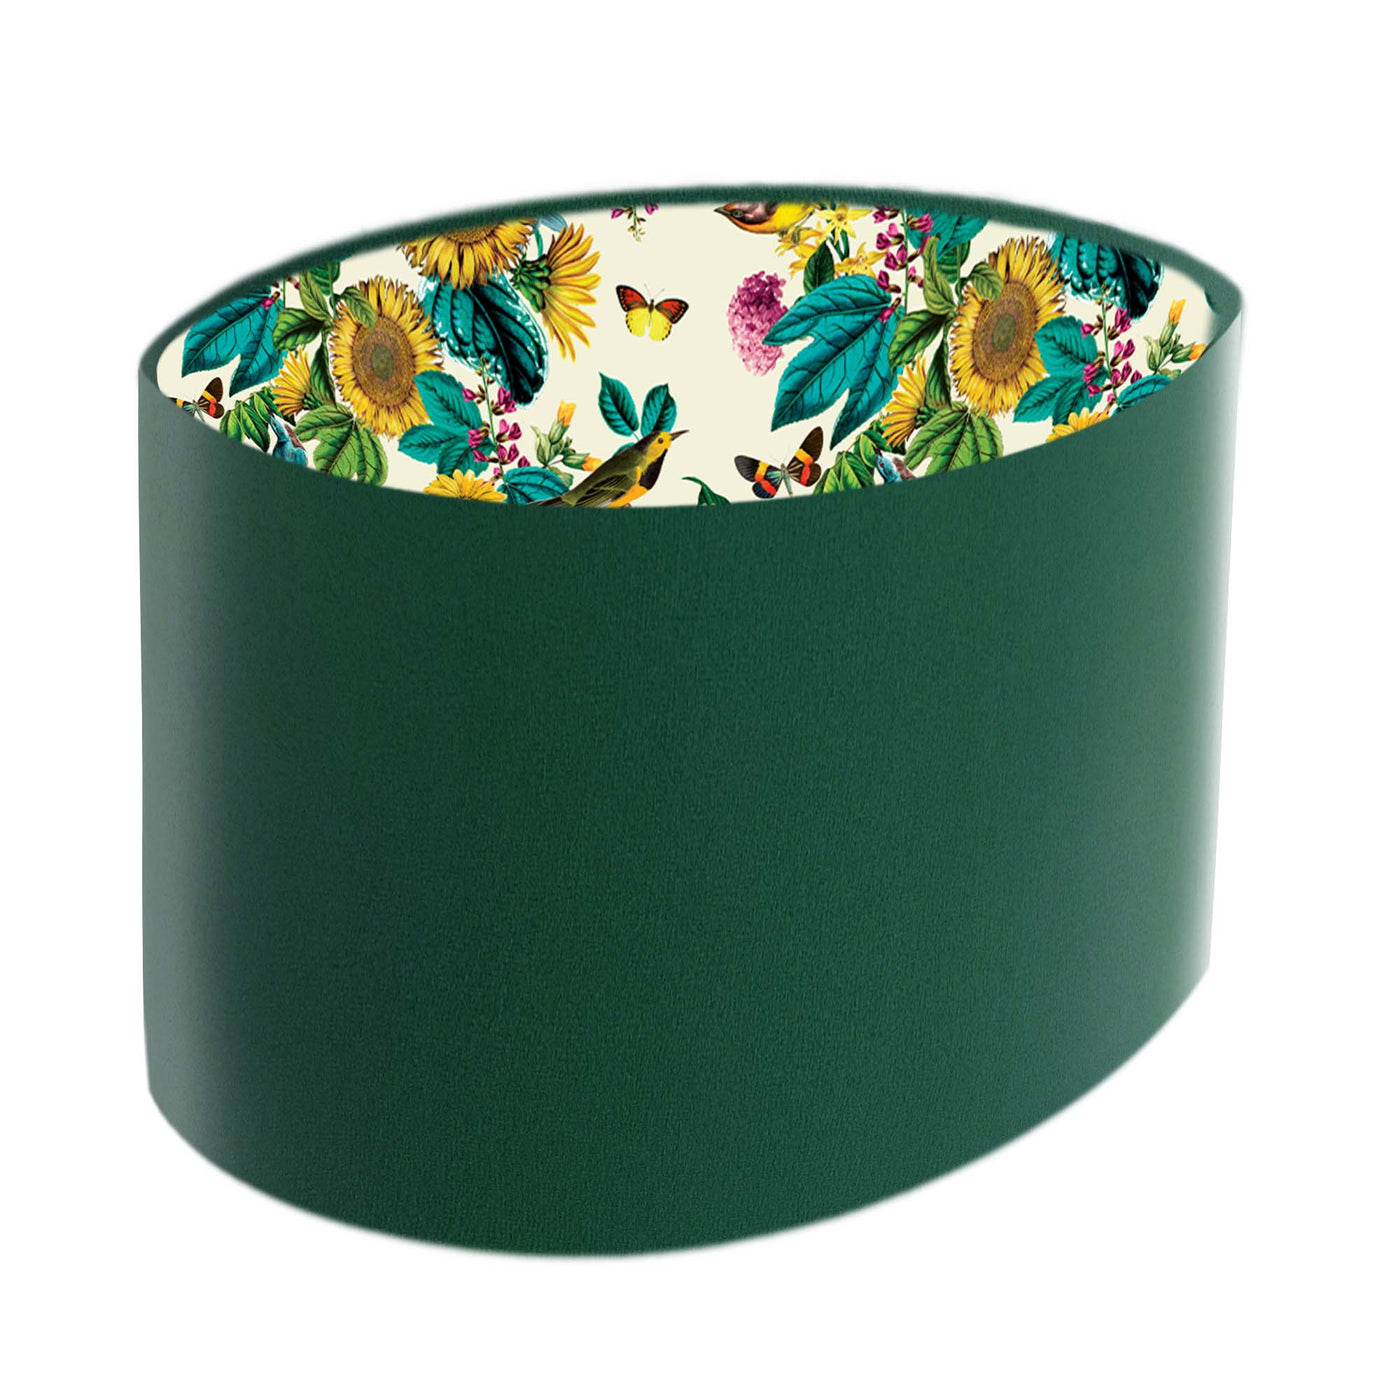 Bottle Green Oval Velvet Lampshade with Birds and Sunflowers in Cream